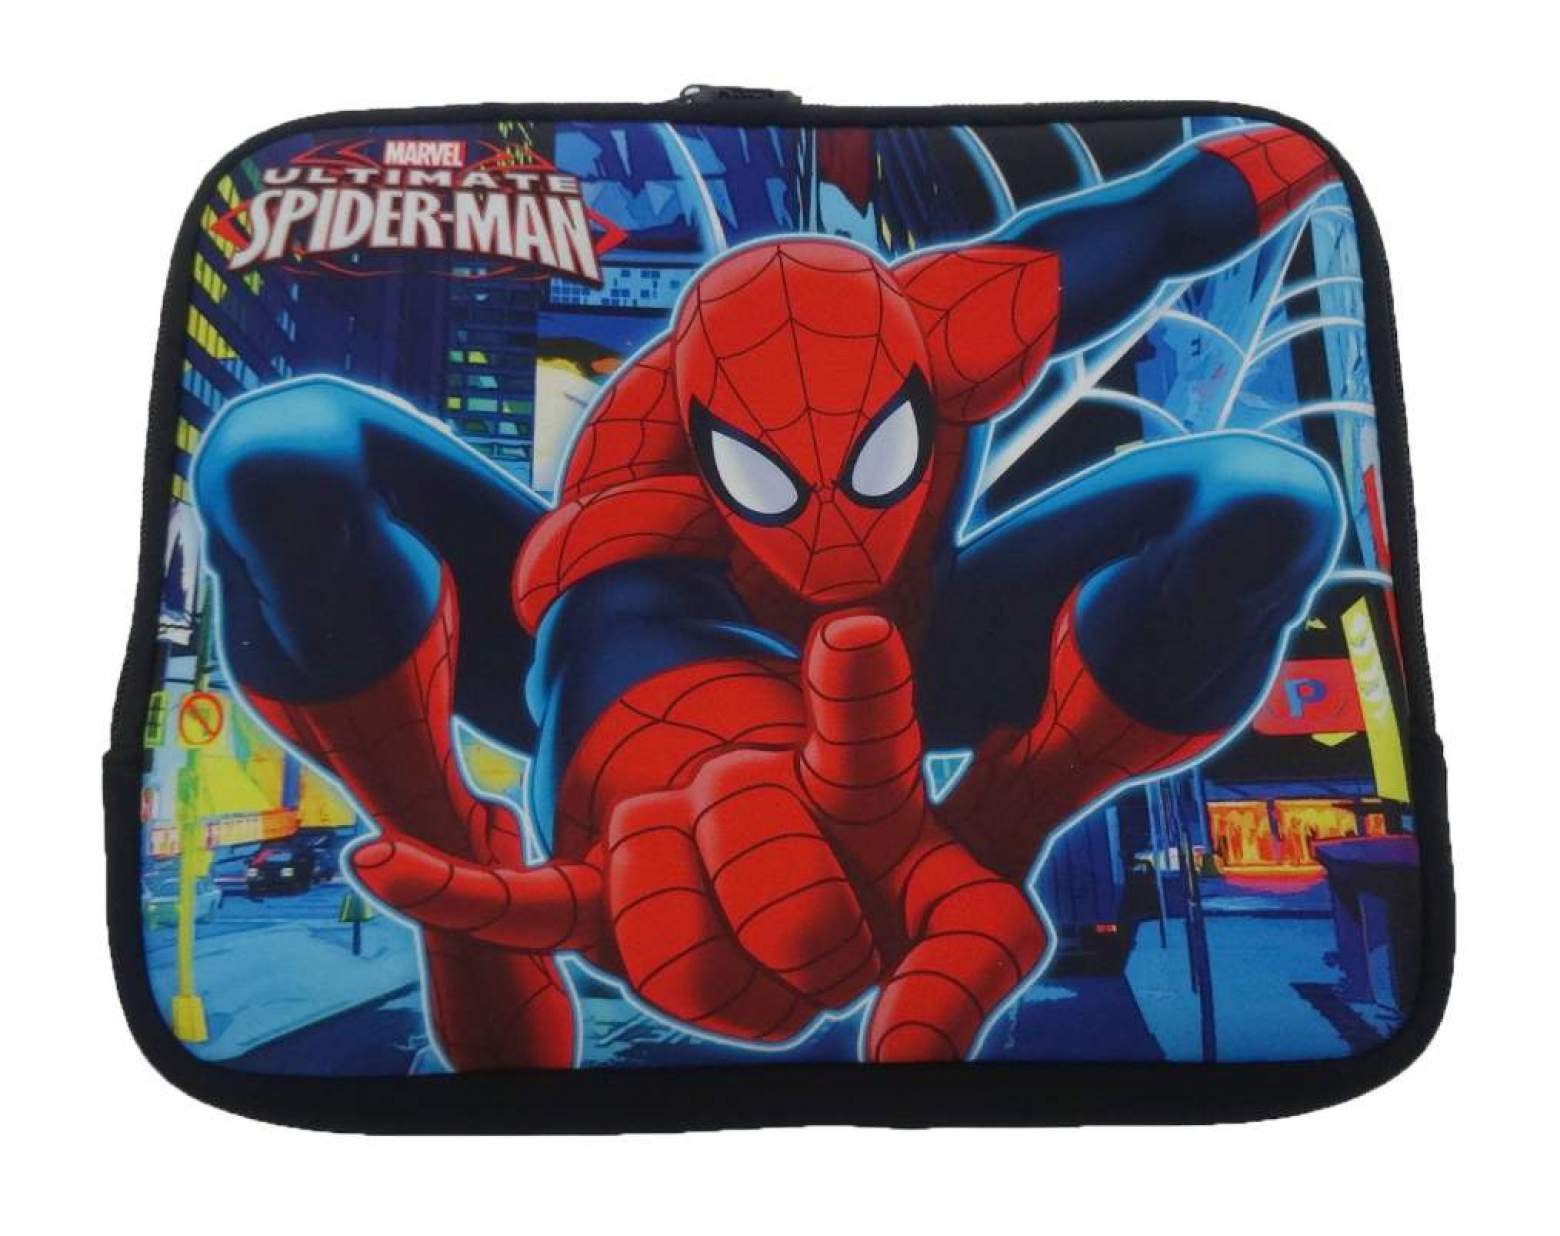 Marvel The Ultimate Spiderman 'Neon' Ipad / Tablet Case Computer Accessories